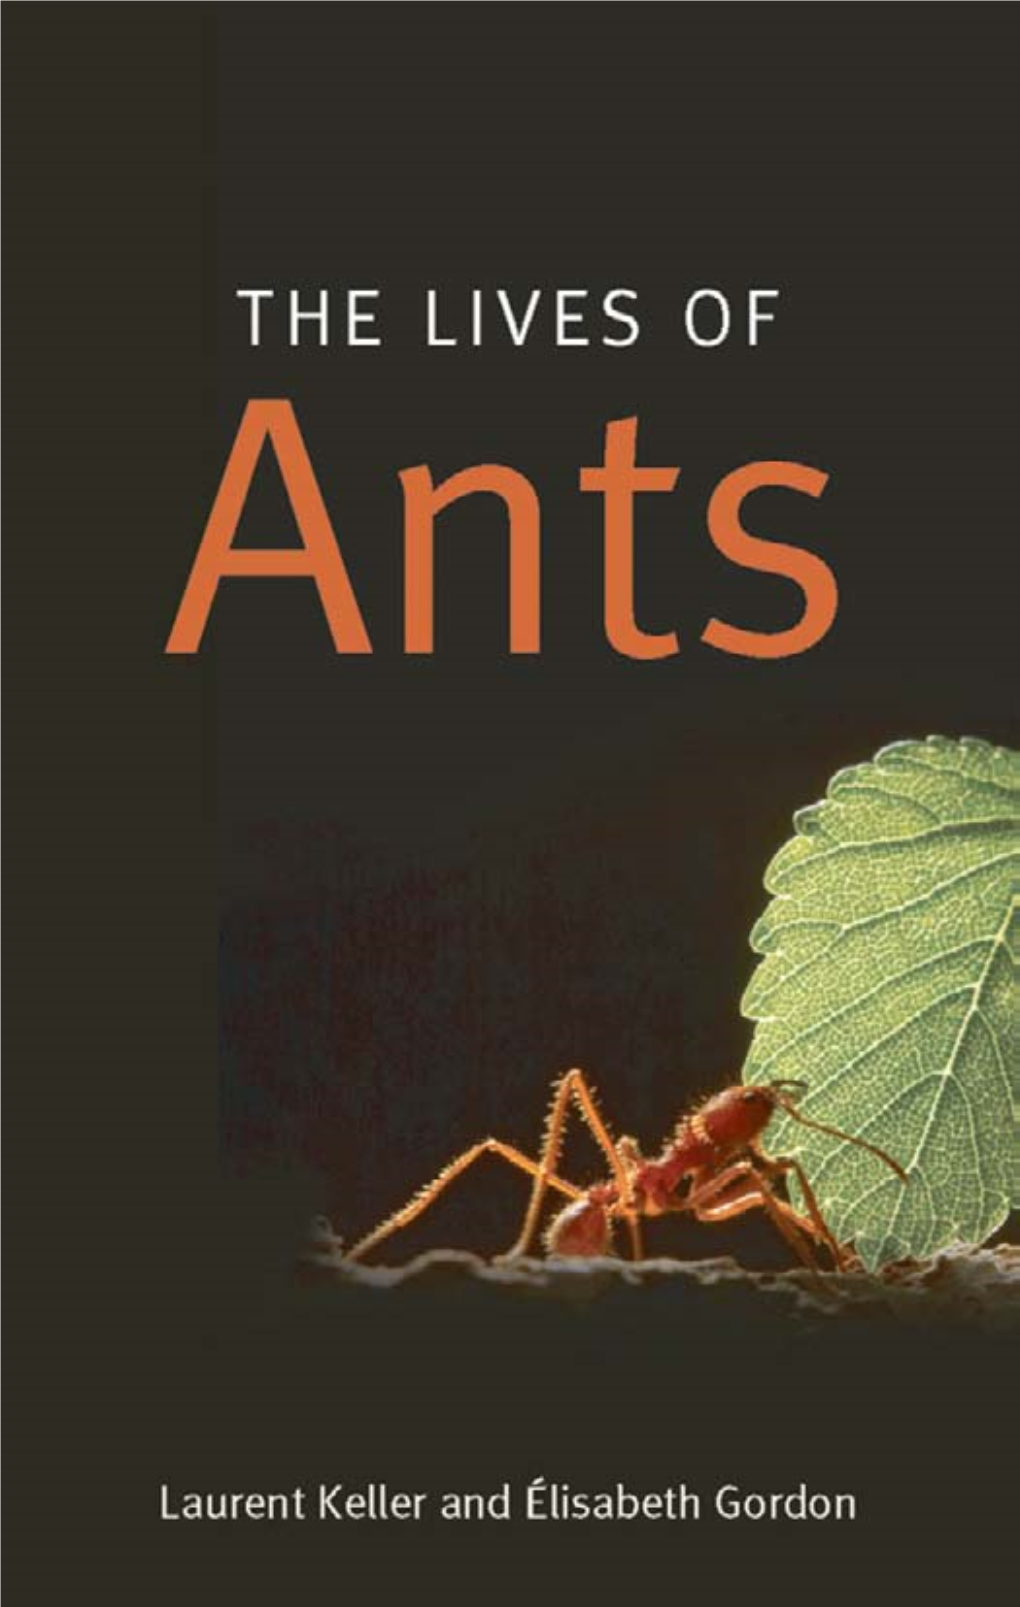 Thea Lives of ANTS